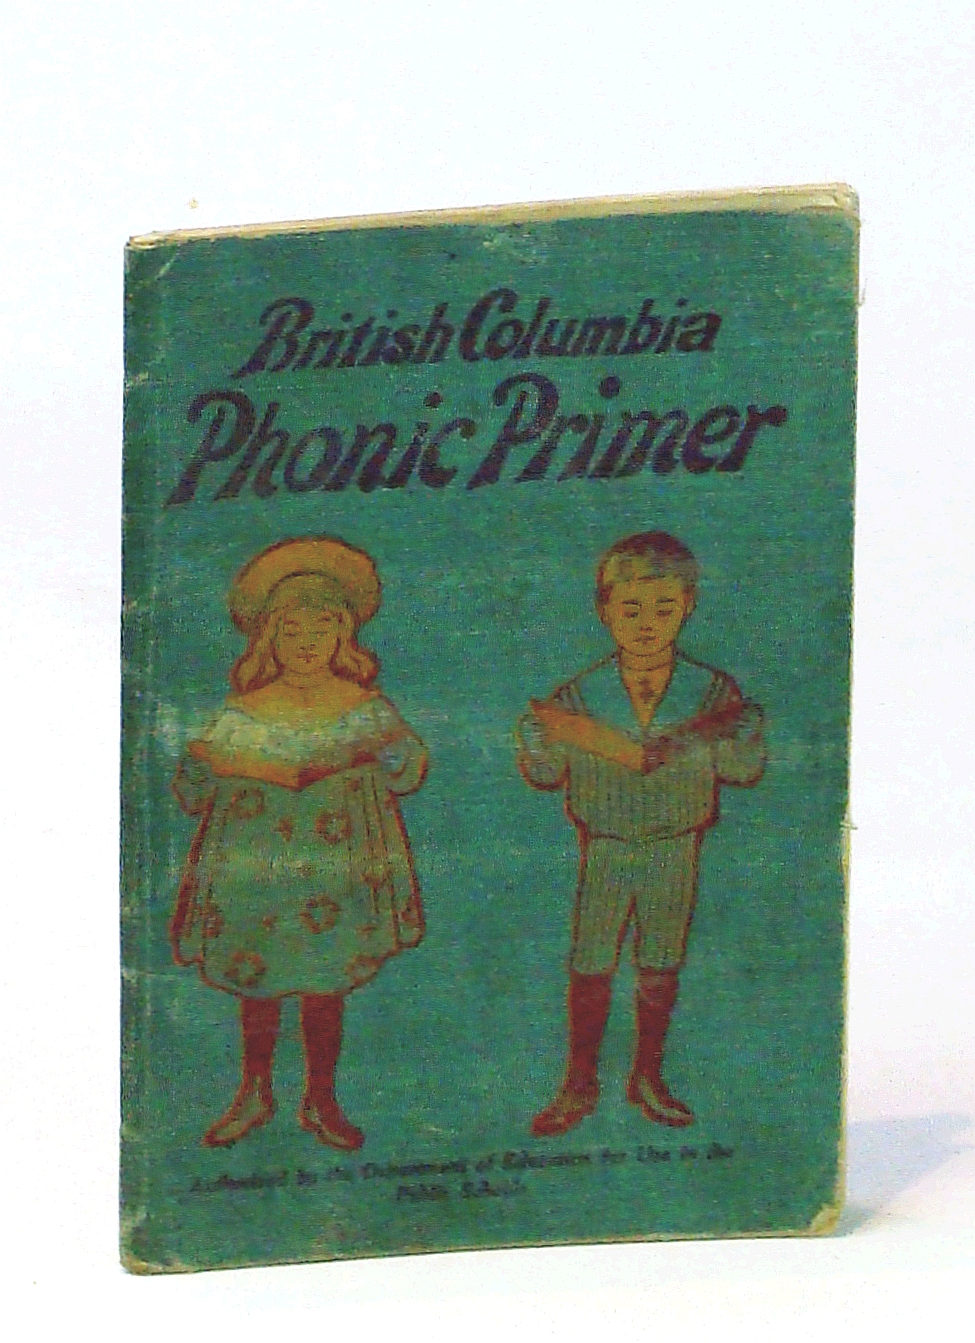 Image for British Columbia Phonic Primer / A First Primer Based on the Phonics System - Authorized By the Department of Education for Use in the Public Schools of British Columbia